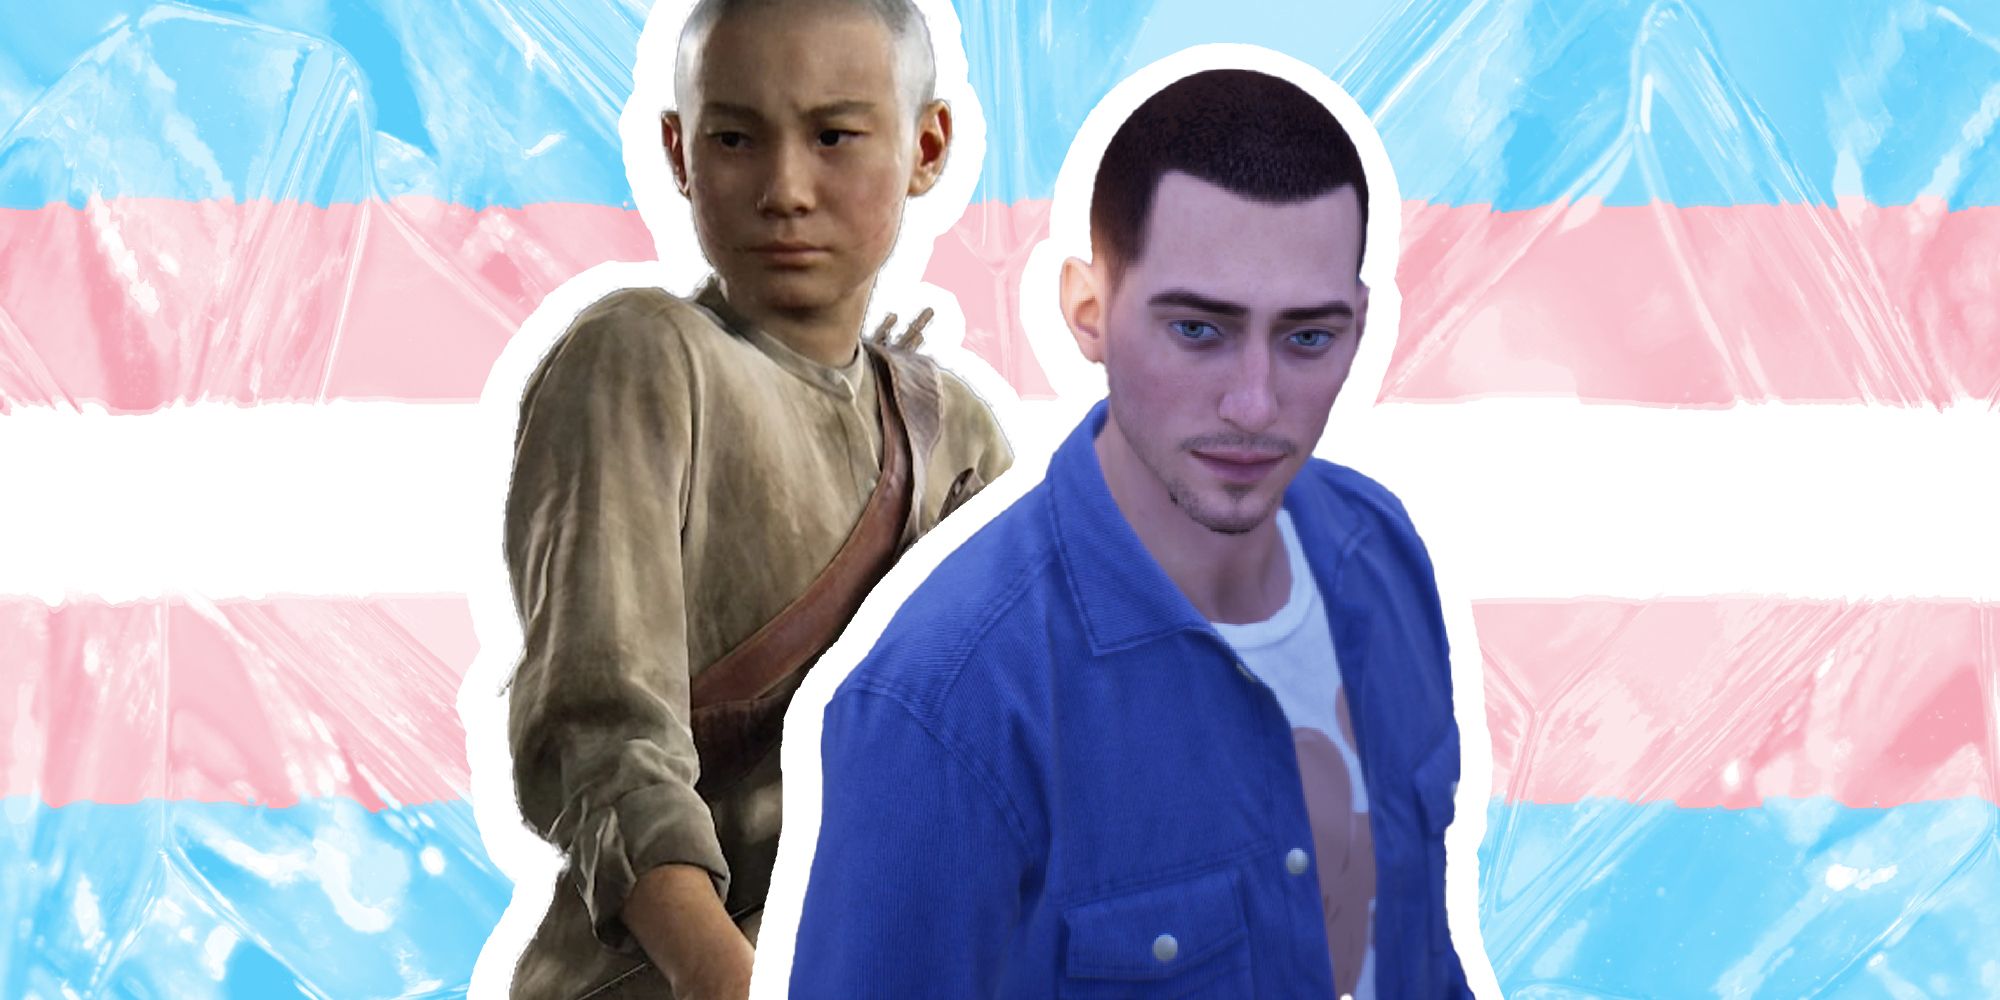 Trans characters in games